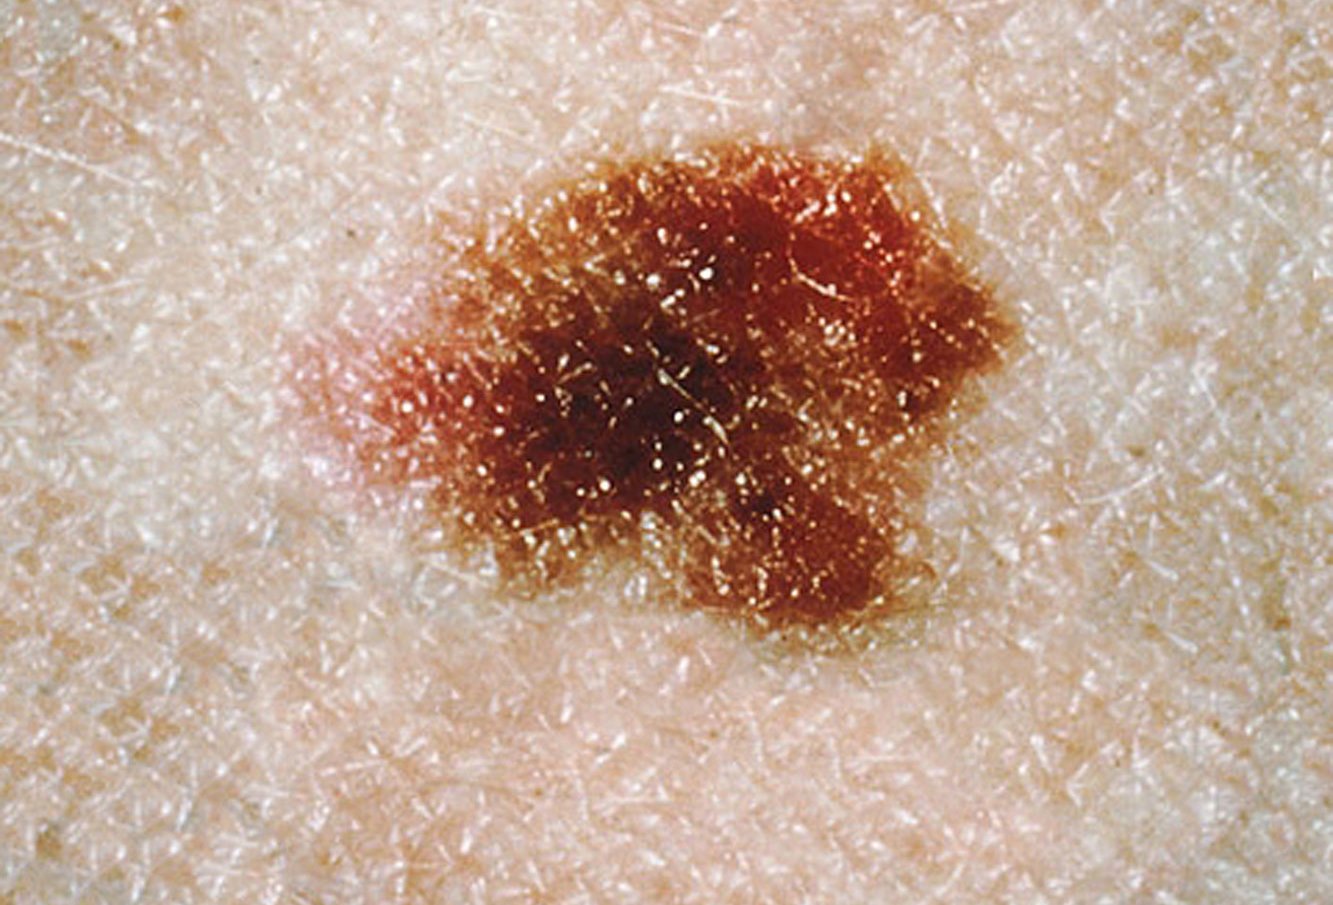 Is Your Mole Larger, More Irregular, Multi-Colored?